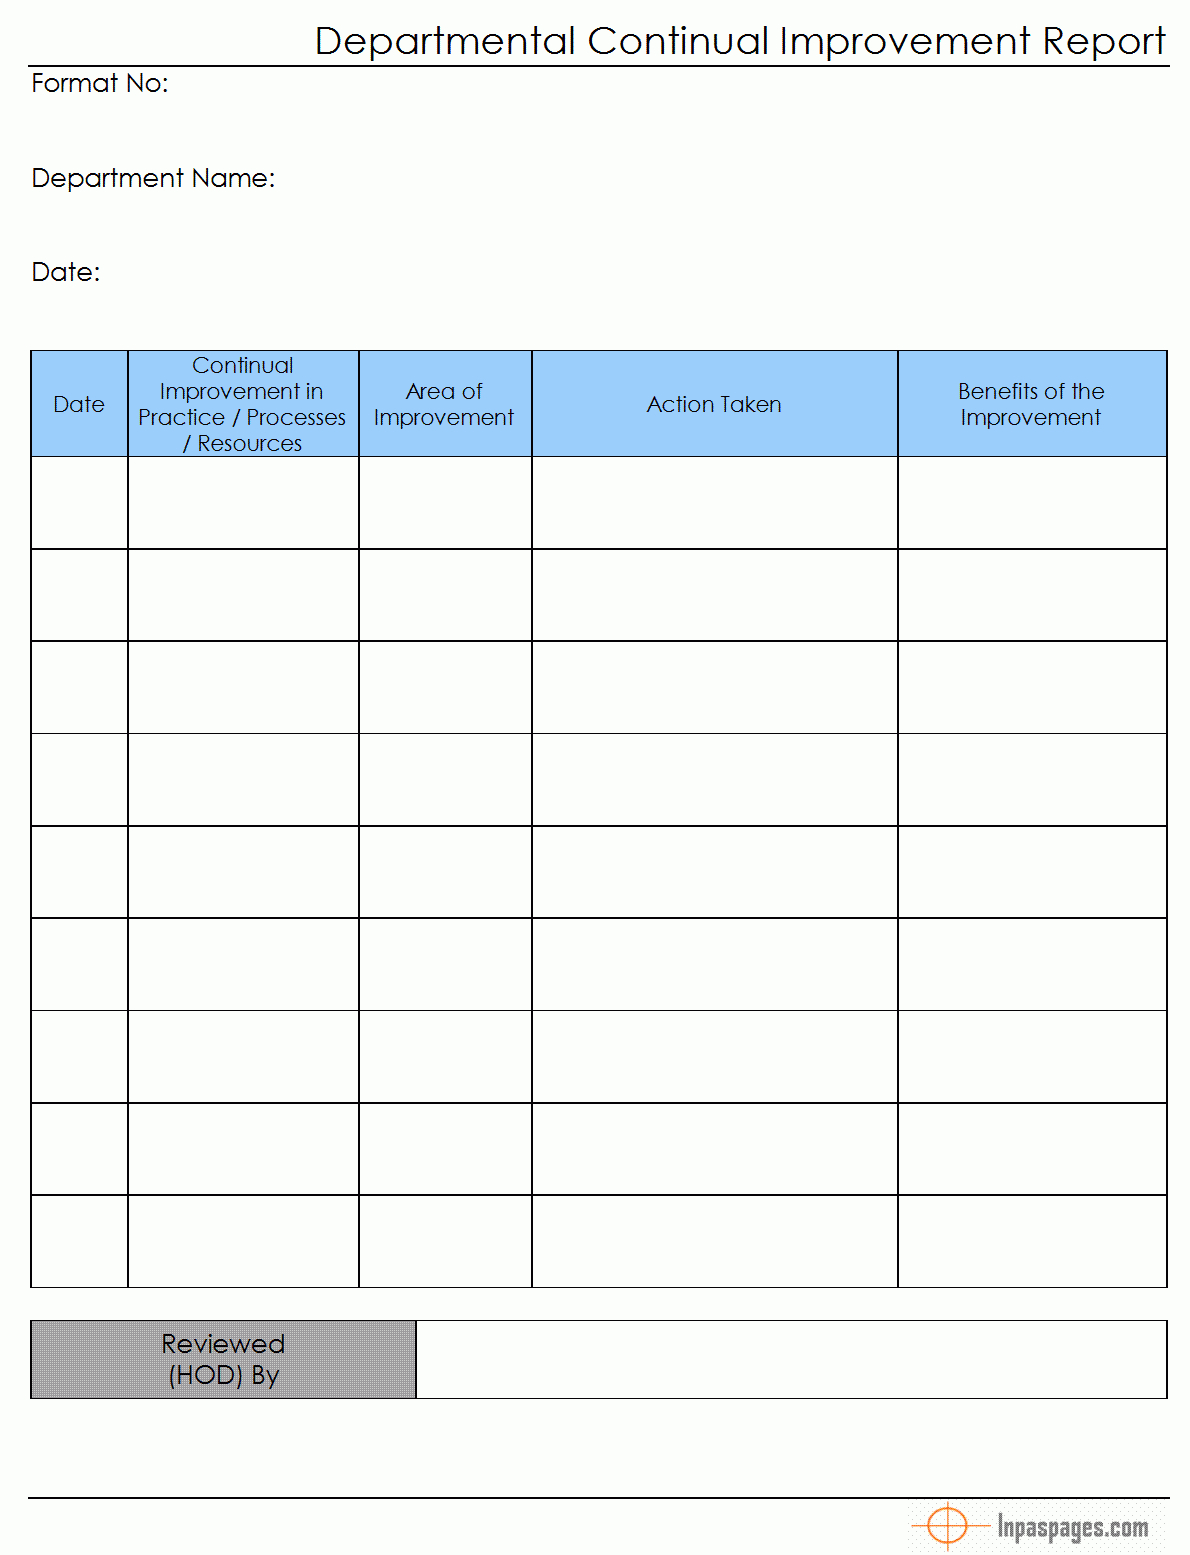 Continual Improvement Report (Departmental) – Intended For Improvement Report Template